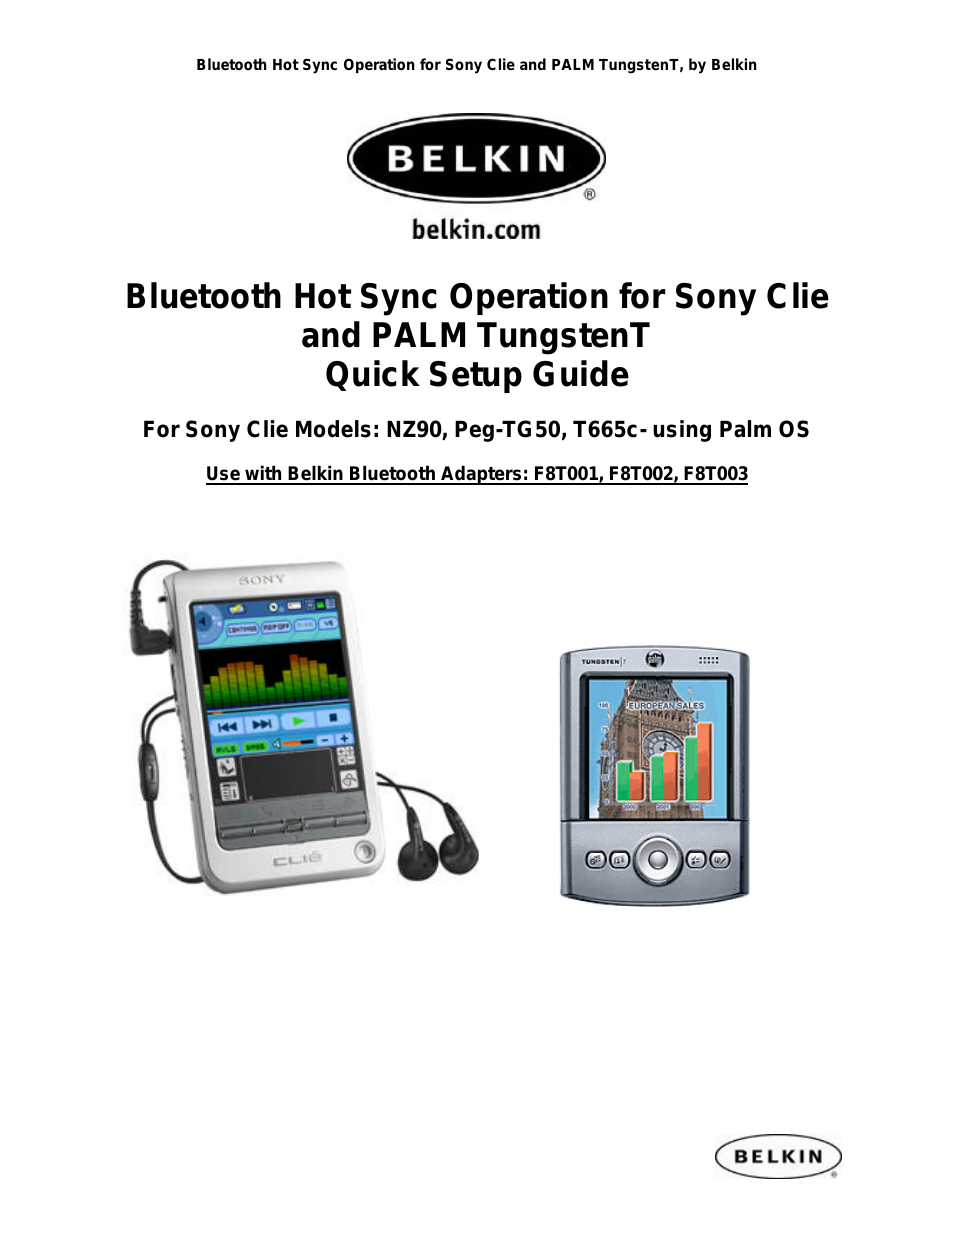 BLUETOOTH HOT SYNC OPERATION F8T002 (Page 1)